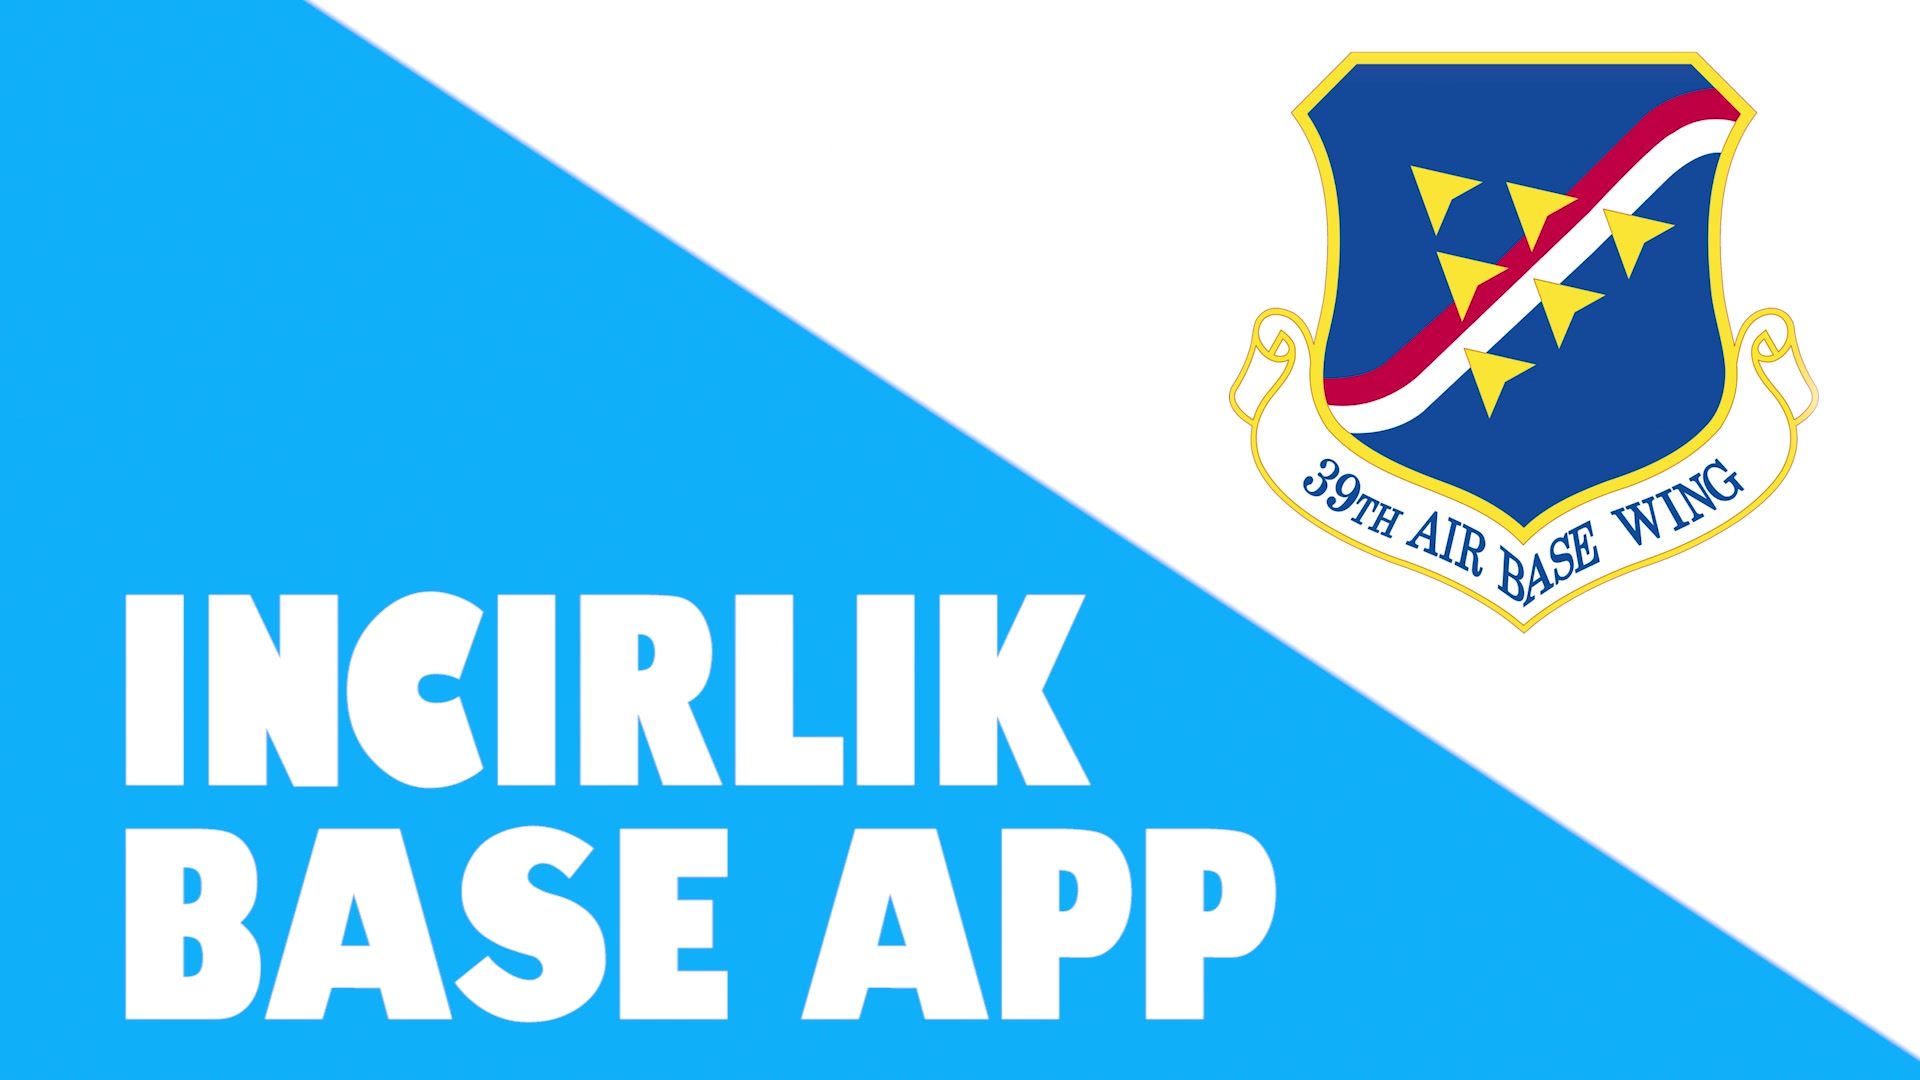 Instructional video showing how to download the 39th Air Base Wing mobile app and displaying a couple of it's features.